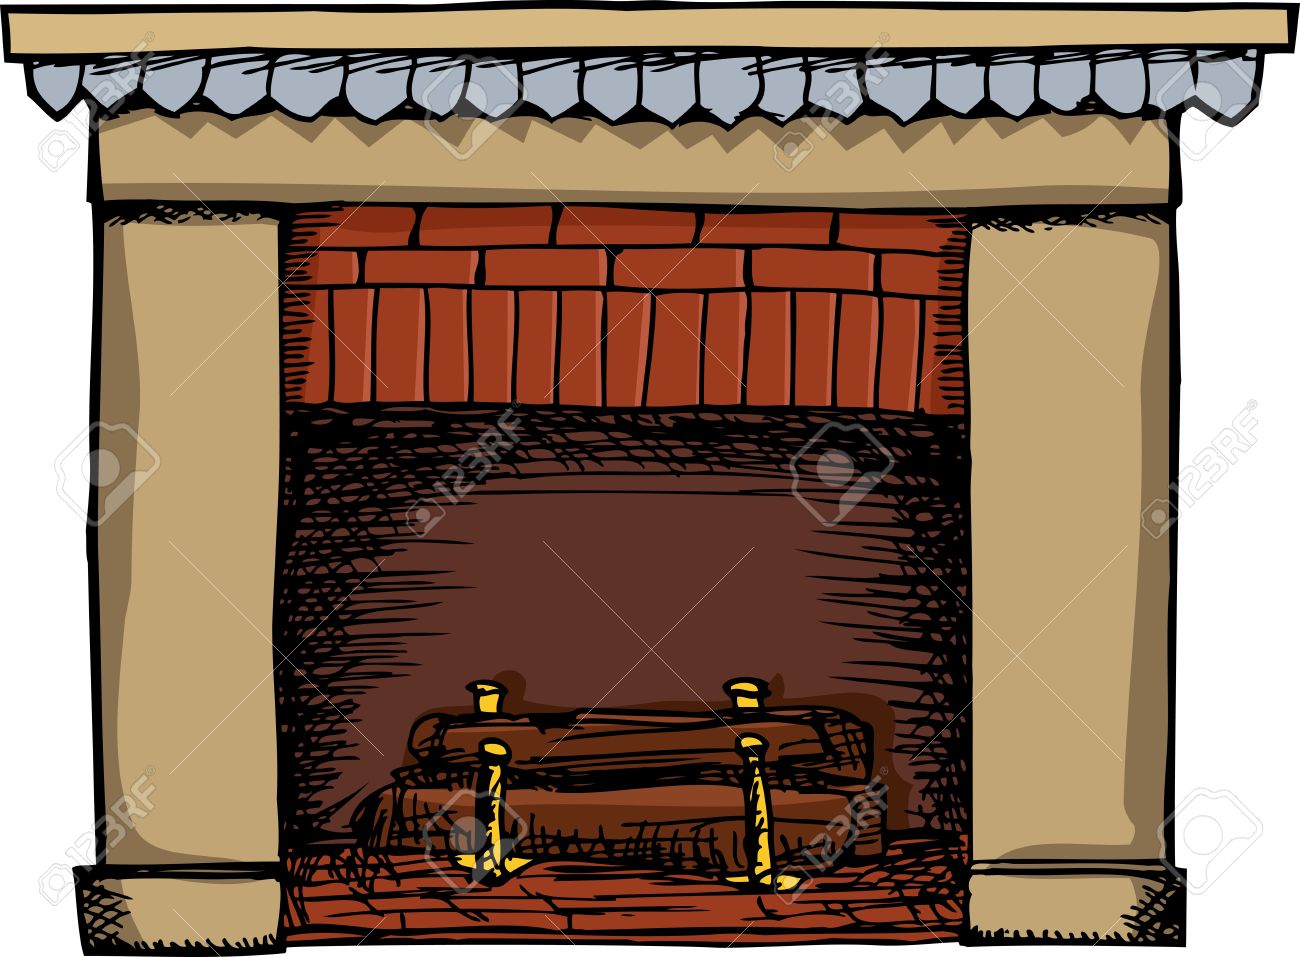 Unlit Fireplace With Logs Isolated Over White Background Royalty